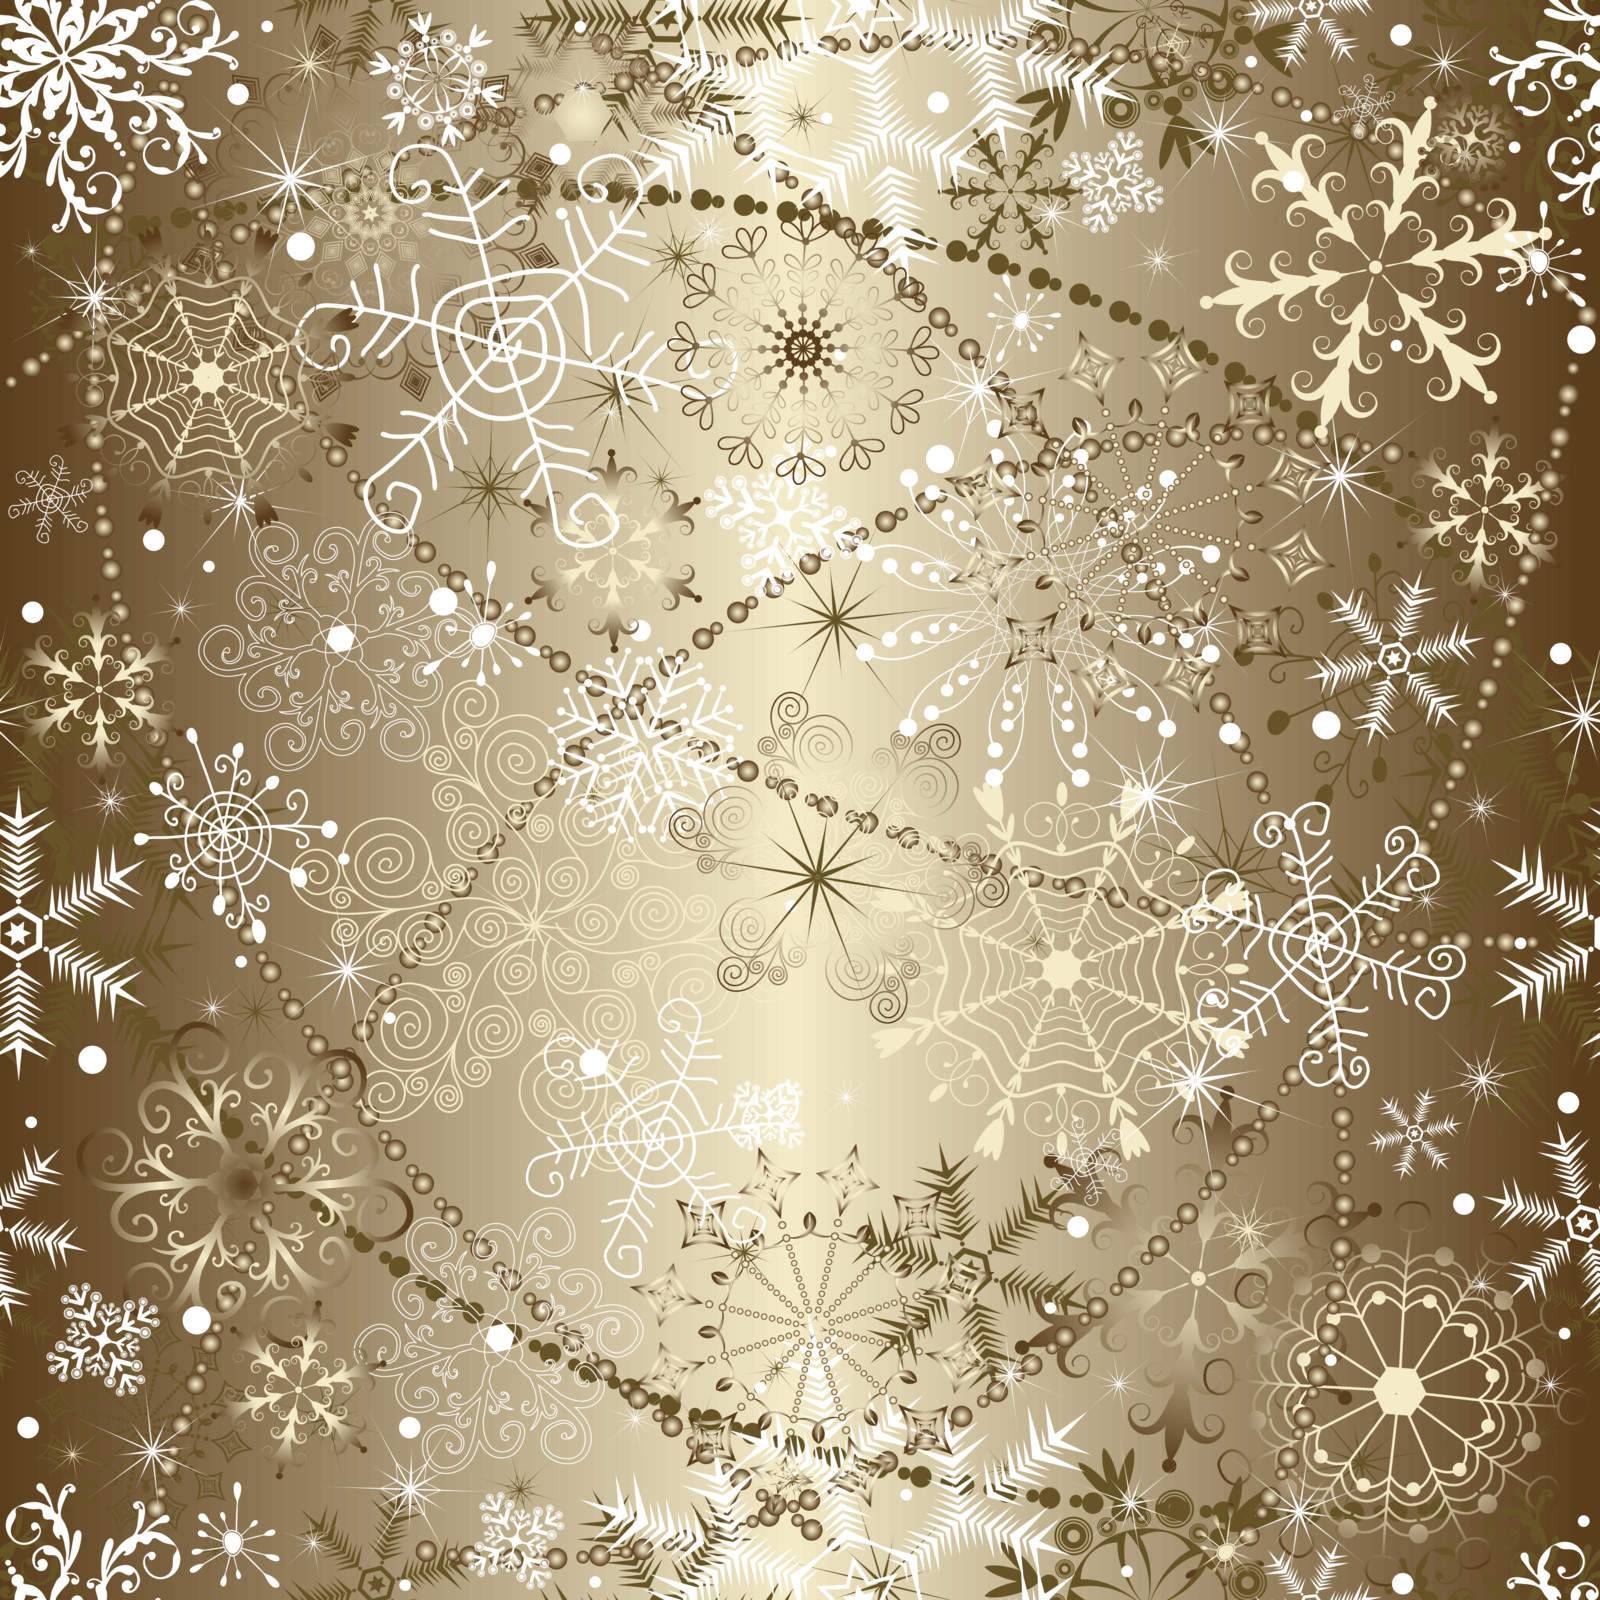 Brilliant golden christmas seamless pattern with snowflakes and garlands (vector)